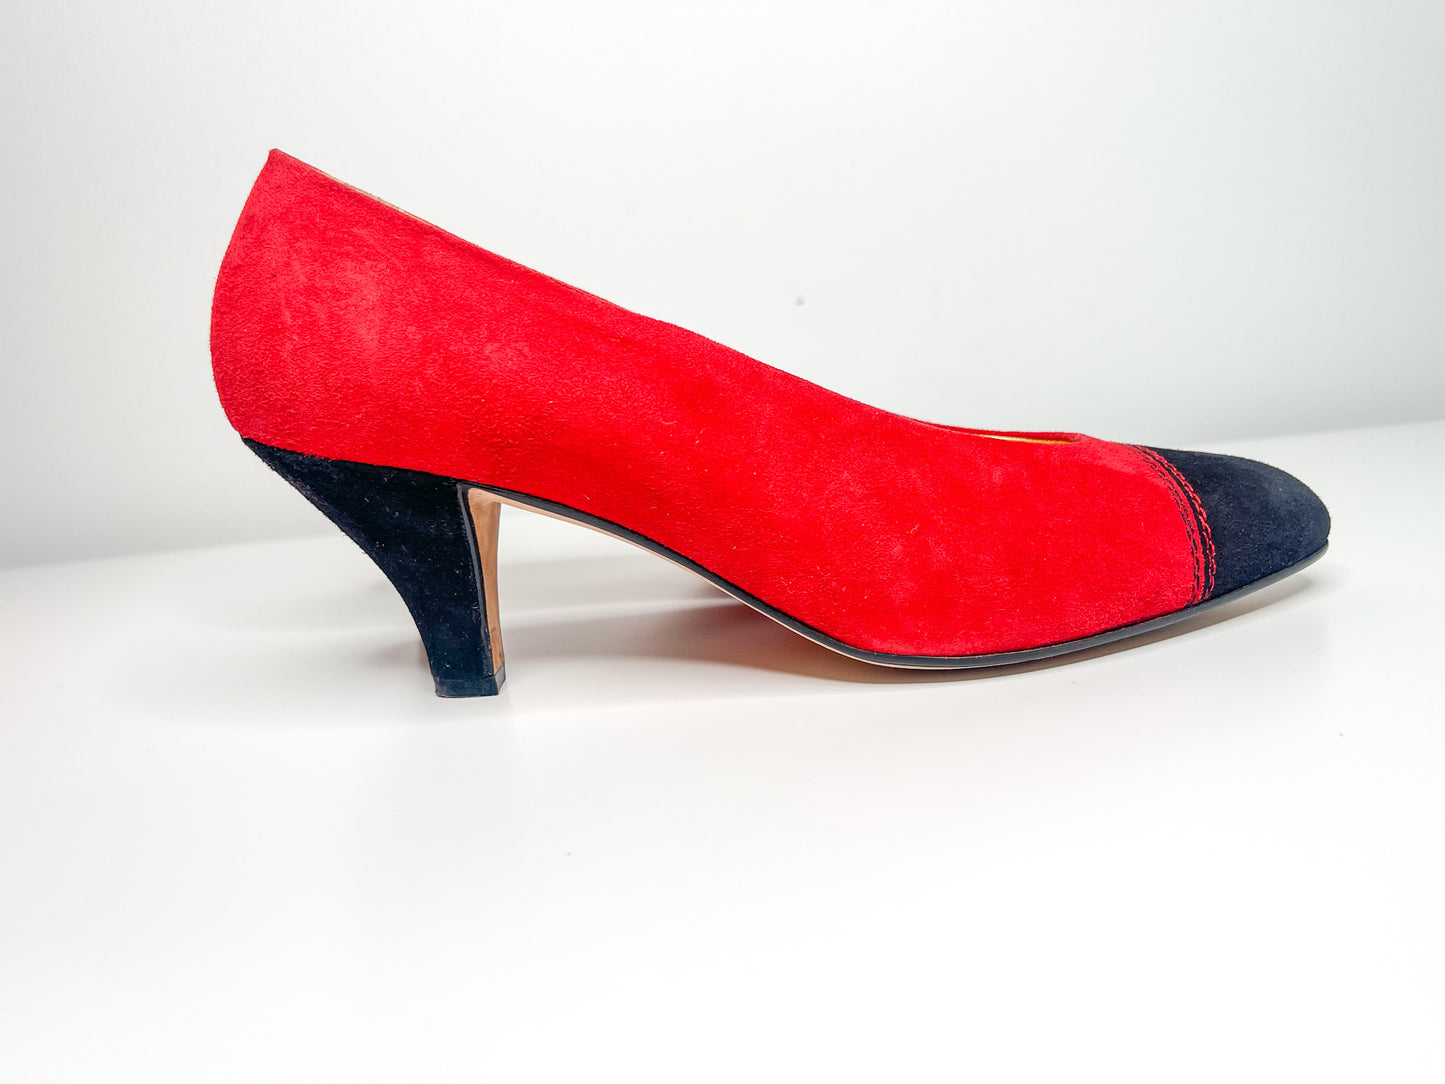 Vintage Andrea Pfister for Holt Renfrew | 1980s Red Ladies Shoes|Made In Italy Shoes| Red Shoes |Vintage Luxury Shoes| Lightly Used Shoes